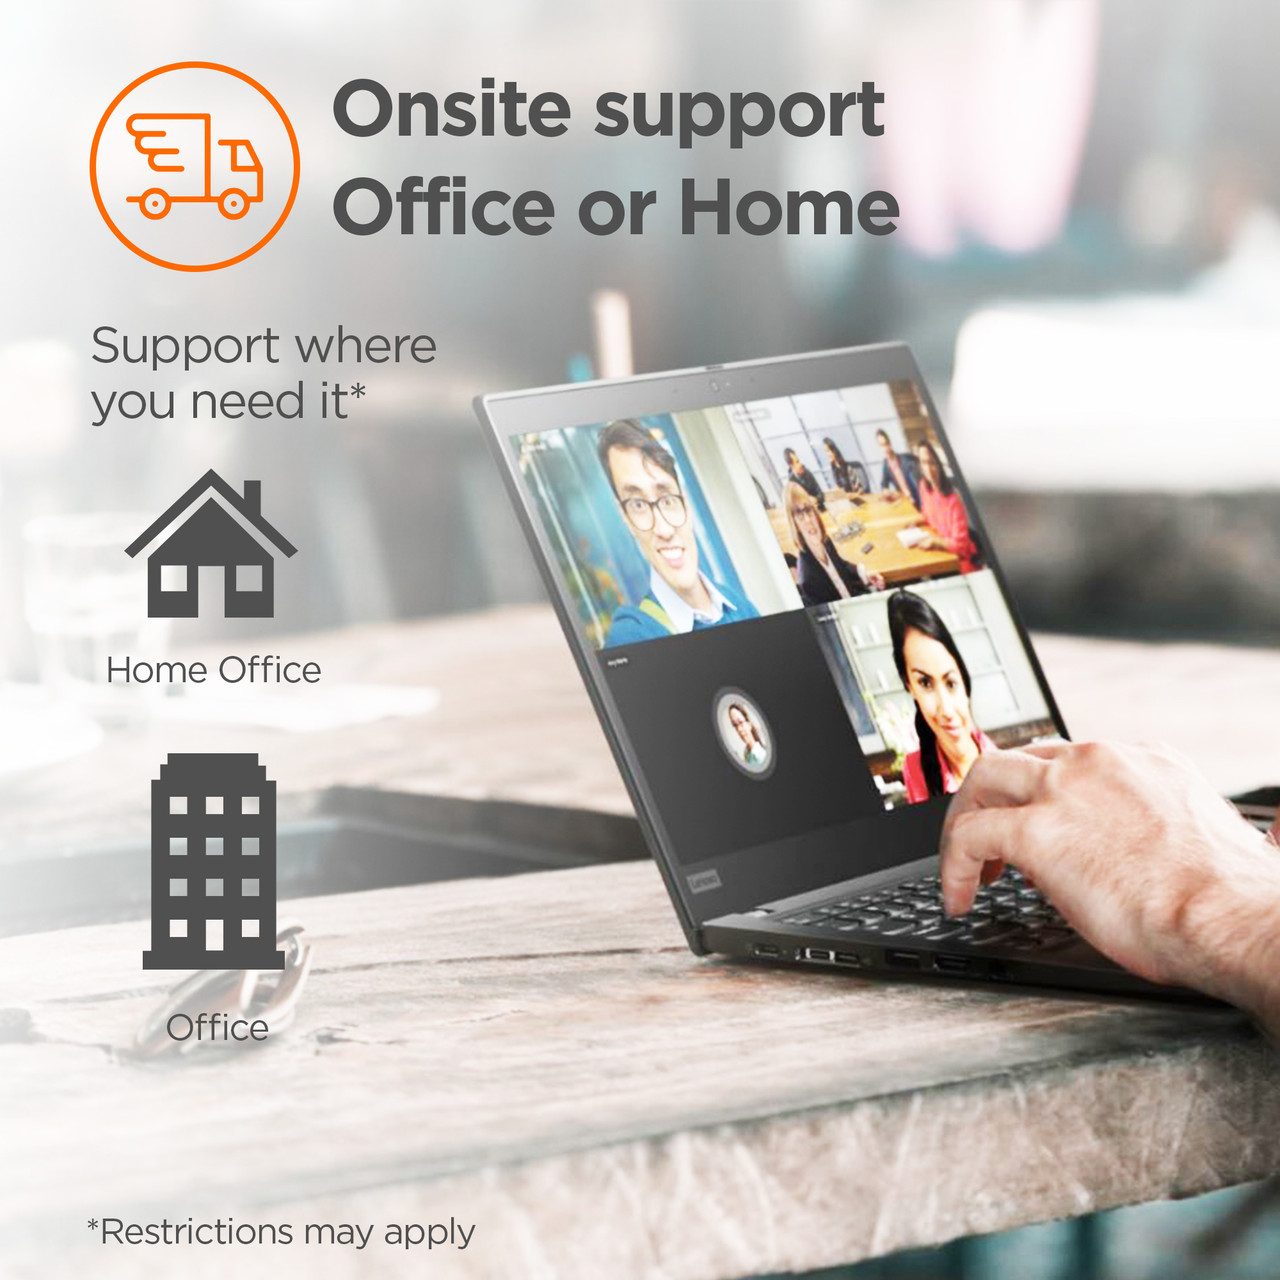 Lenovo Onsite + Premier Support, Extended service agreement, parts and labour, 3 years, on-site, response time: NBD, for ThinkPad P1; P40 Yoga; P50; P50s; P51; P51s; P52; P52s; P70; P71; P72; W541; W550s